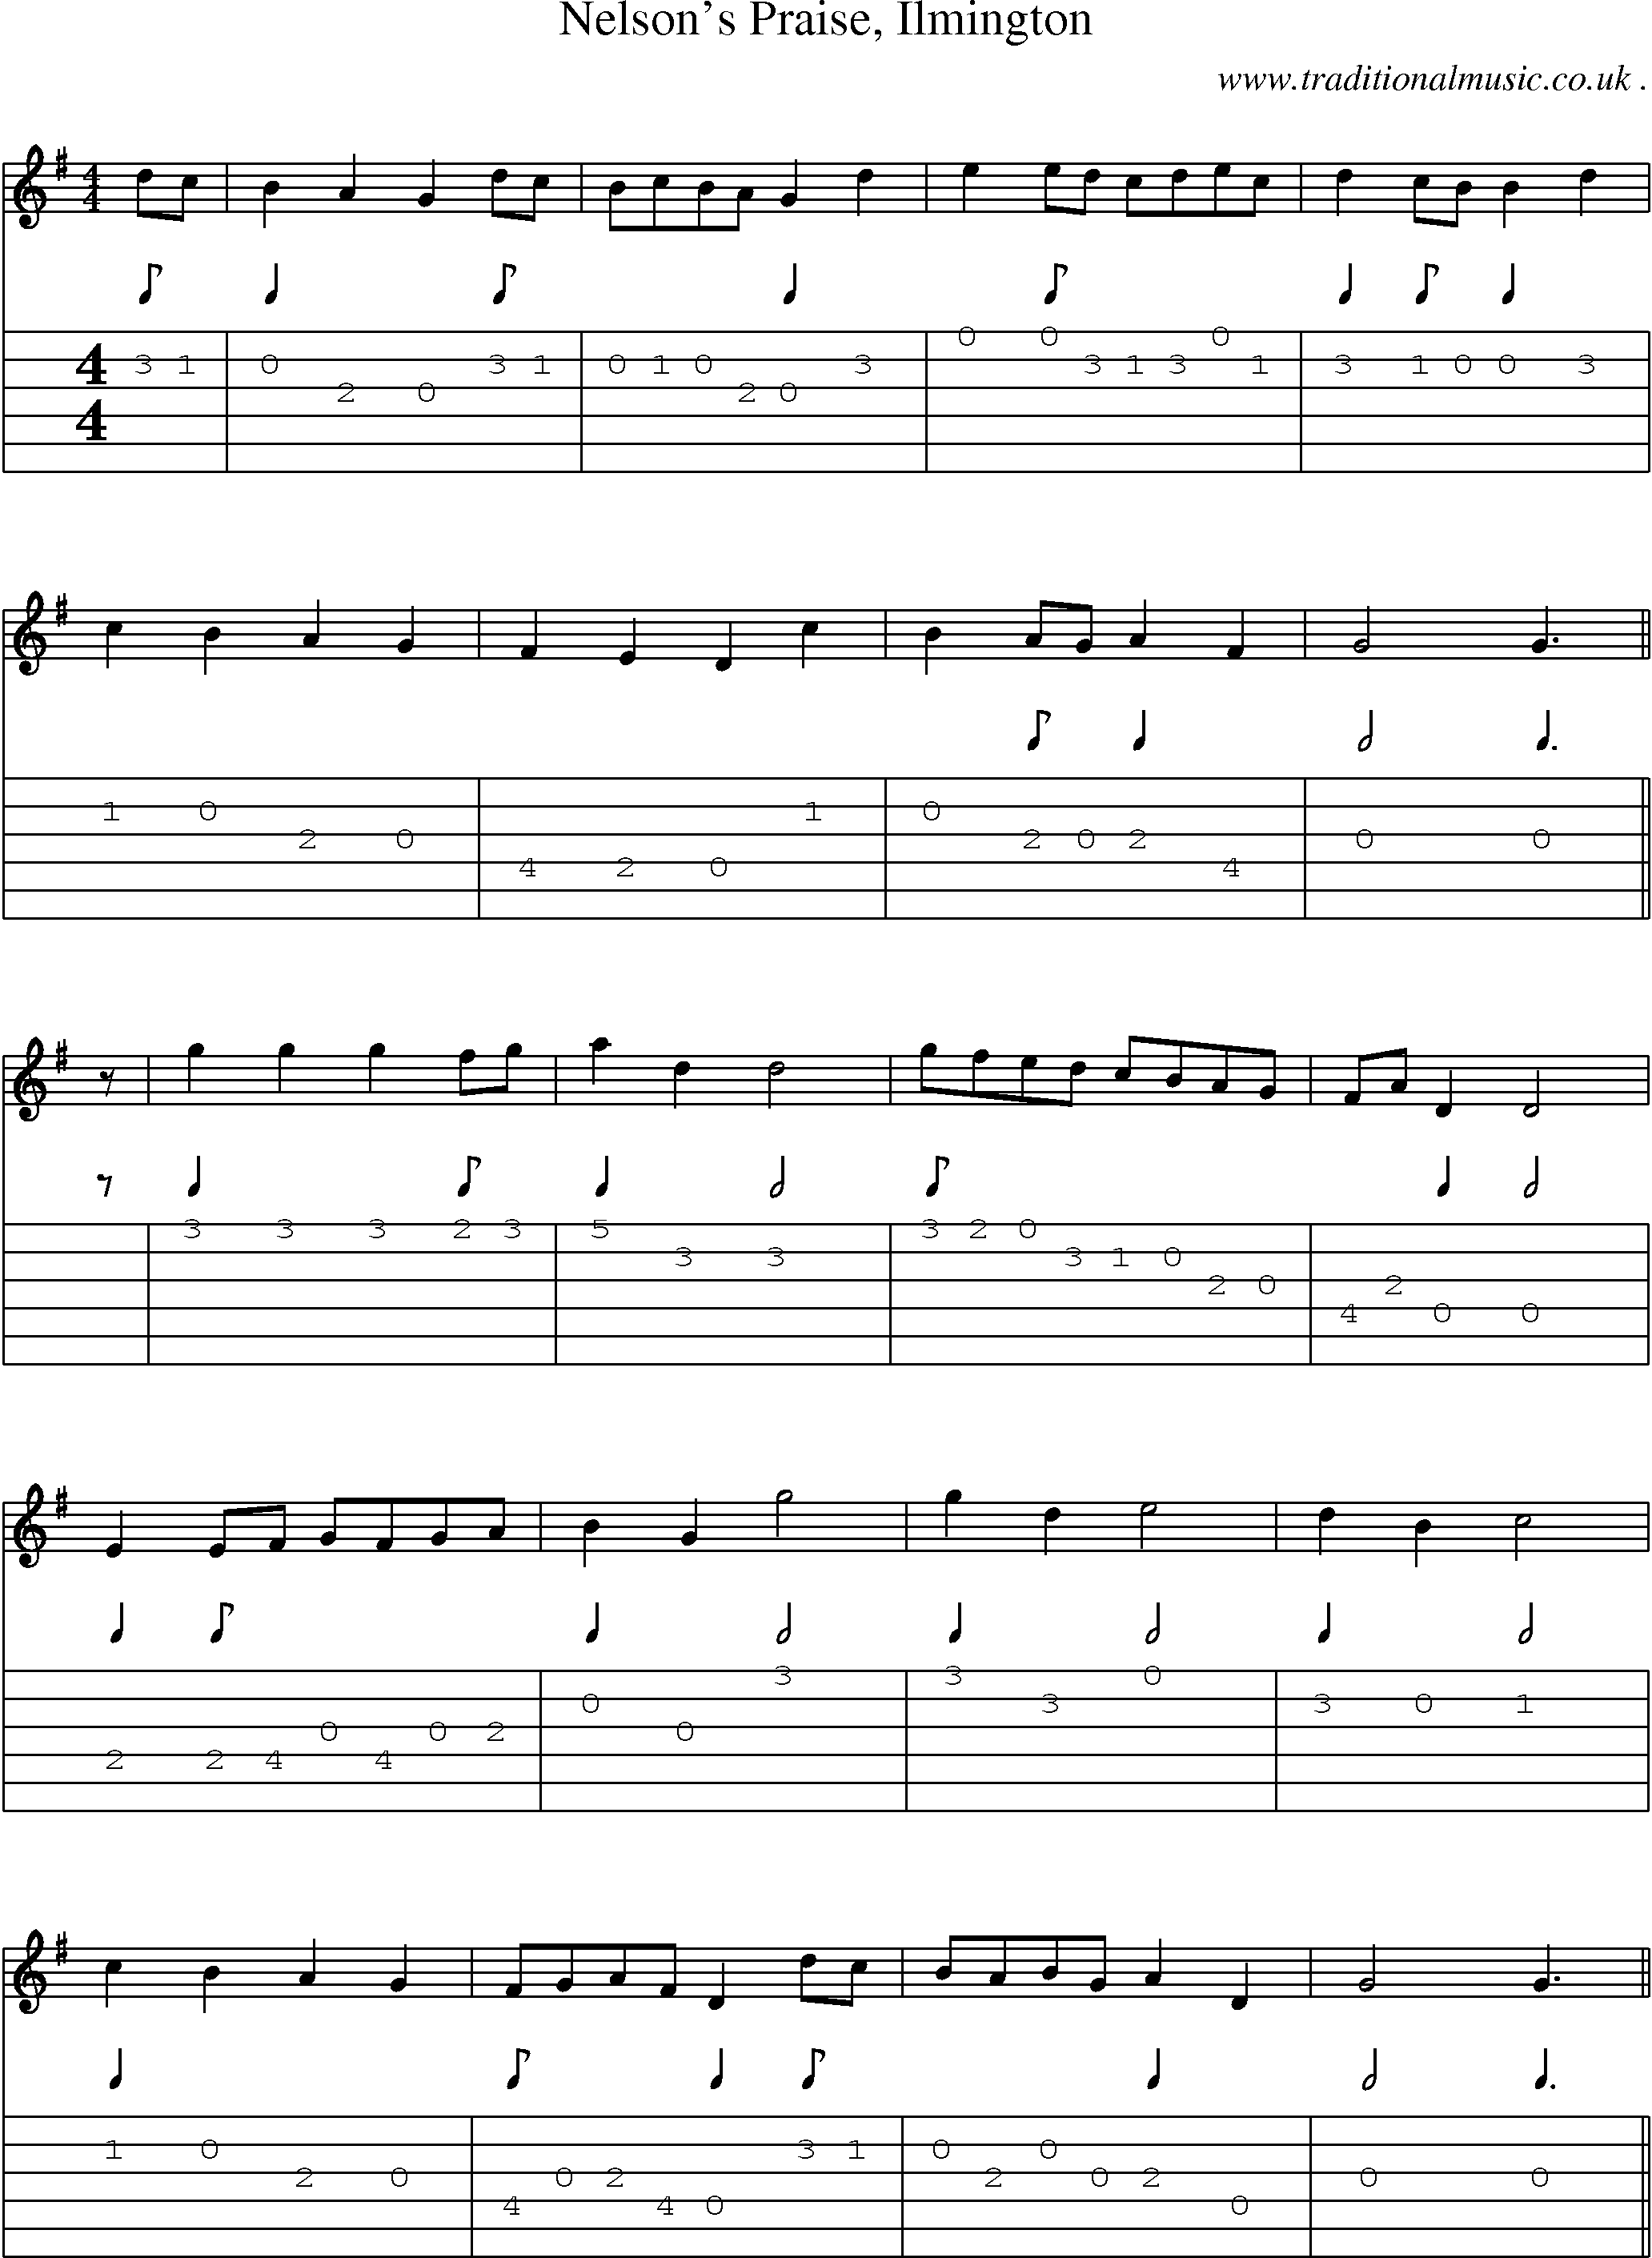 Sheet-Music and Guitar Tabs for Nelsons Praise Ilmington